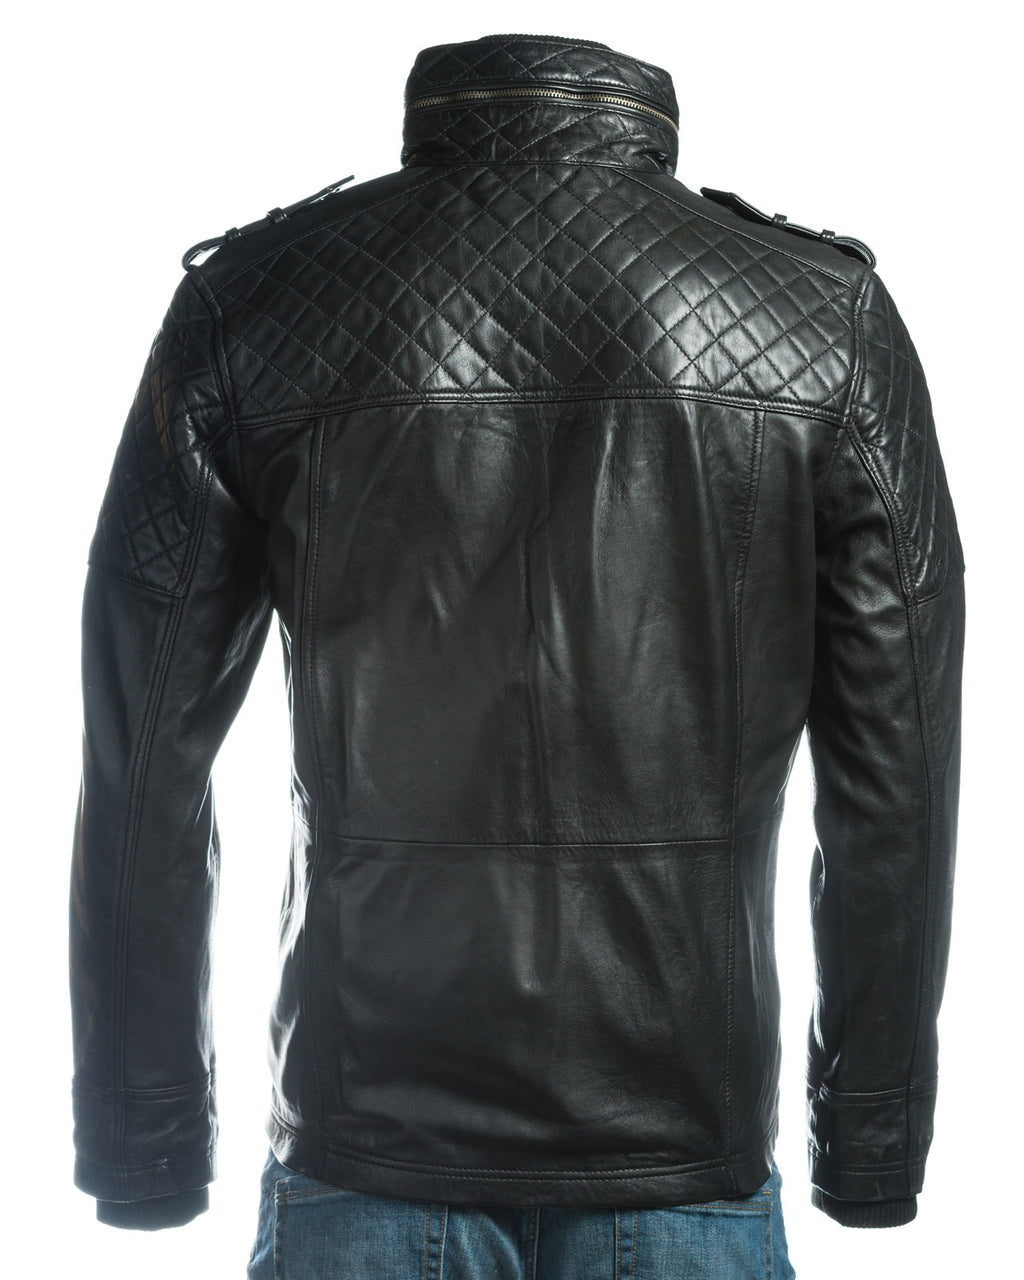 Men's Black Mid Length Leather Jacket With Double Collar Shoulder Stitch Detail: Orlando